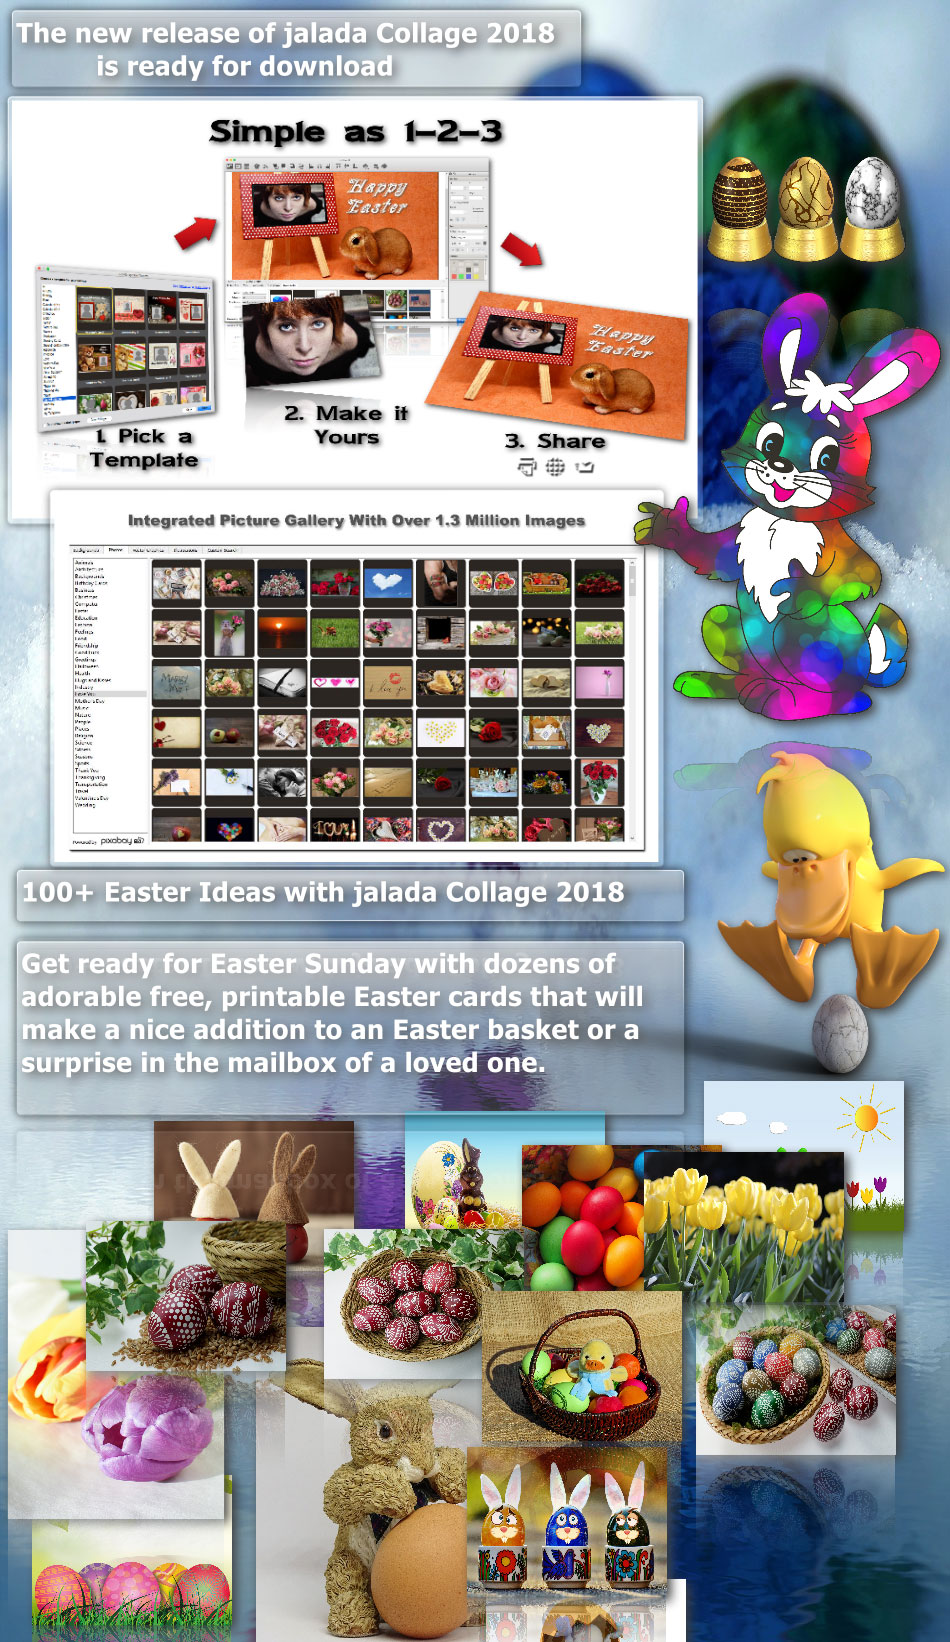 Easter ideas with jalada Collage 2018